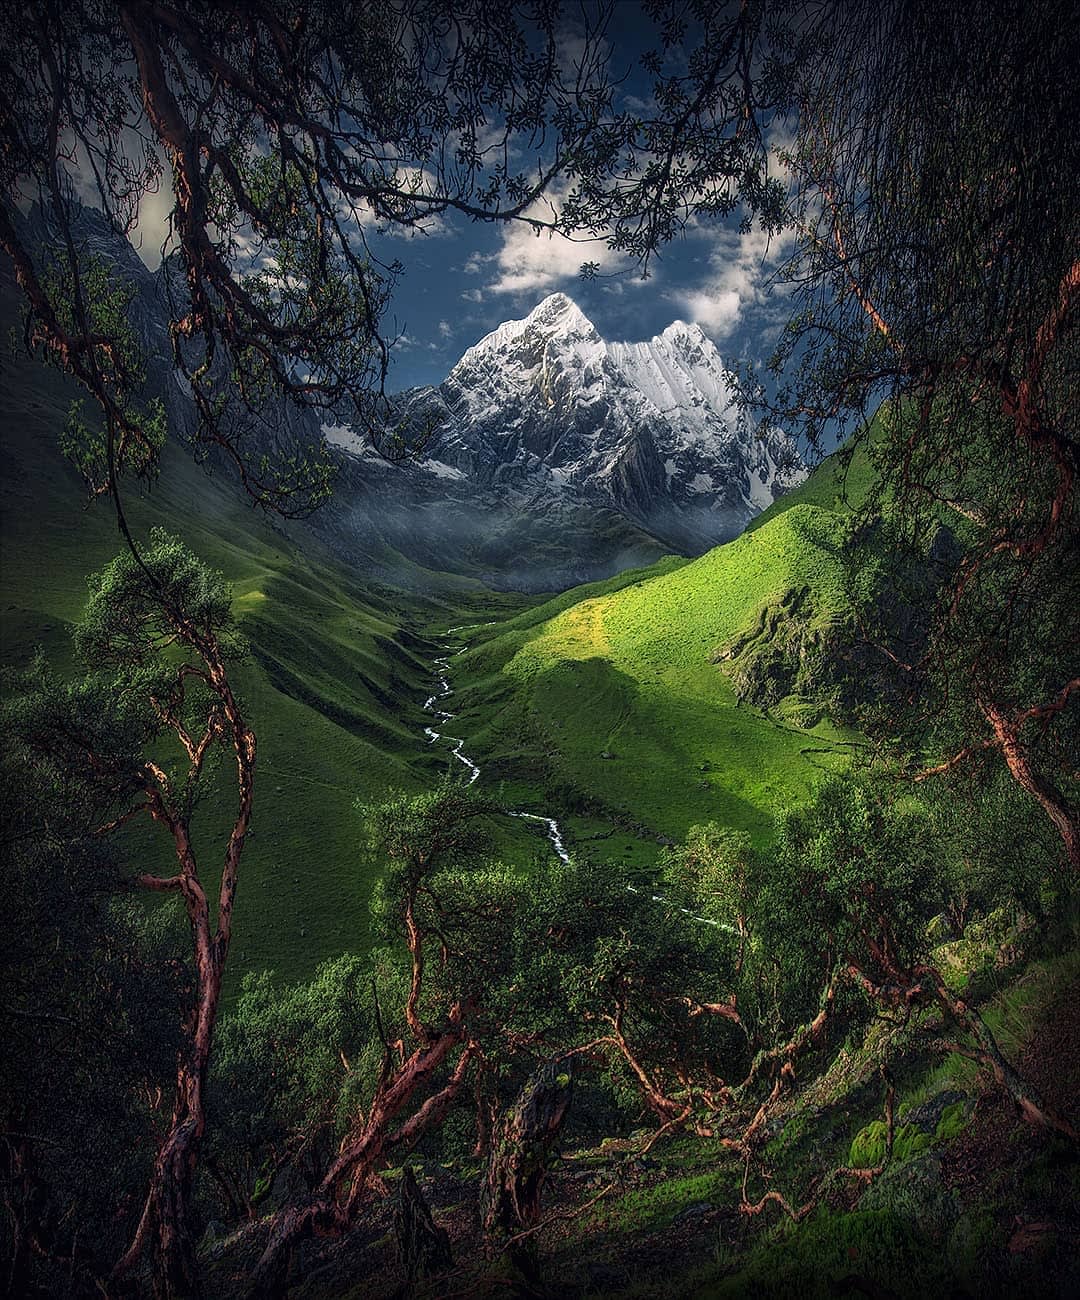 View of snowy peaks, Peru, photo by max rive